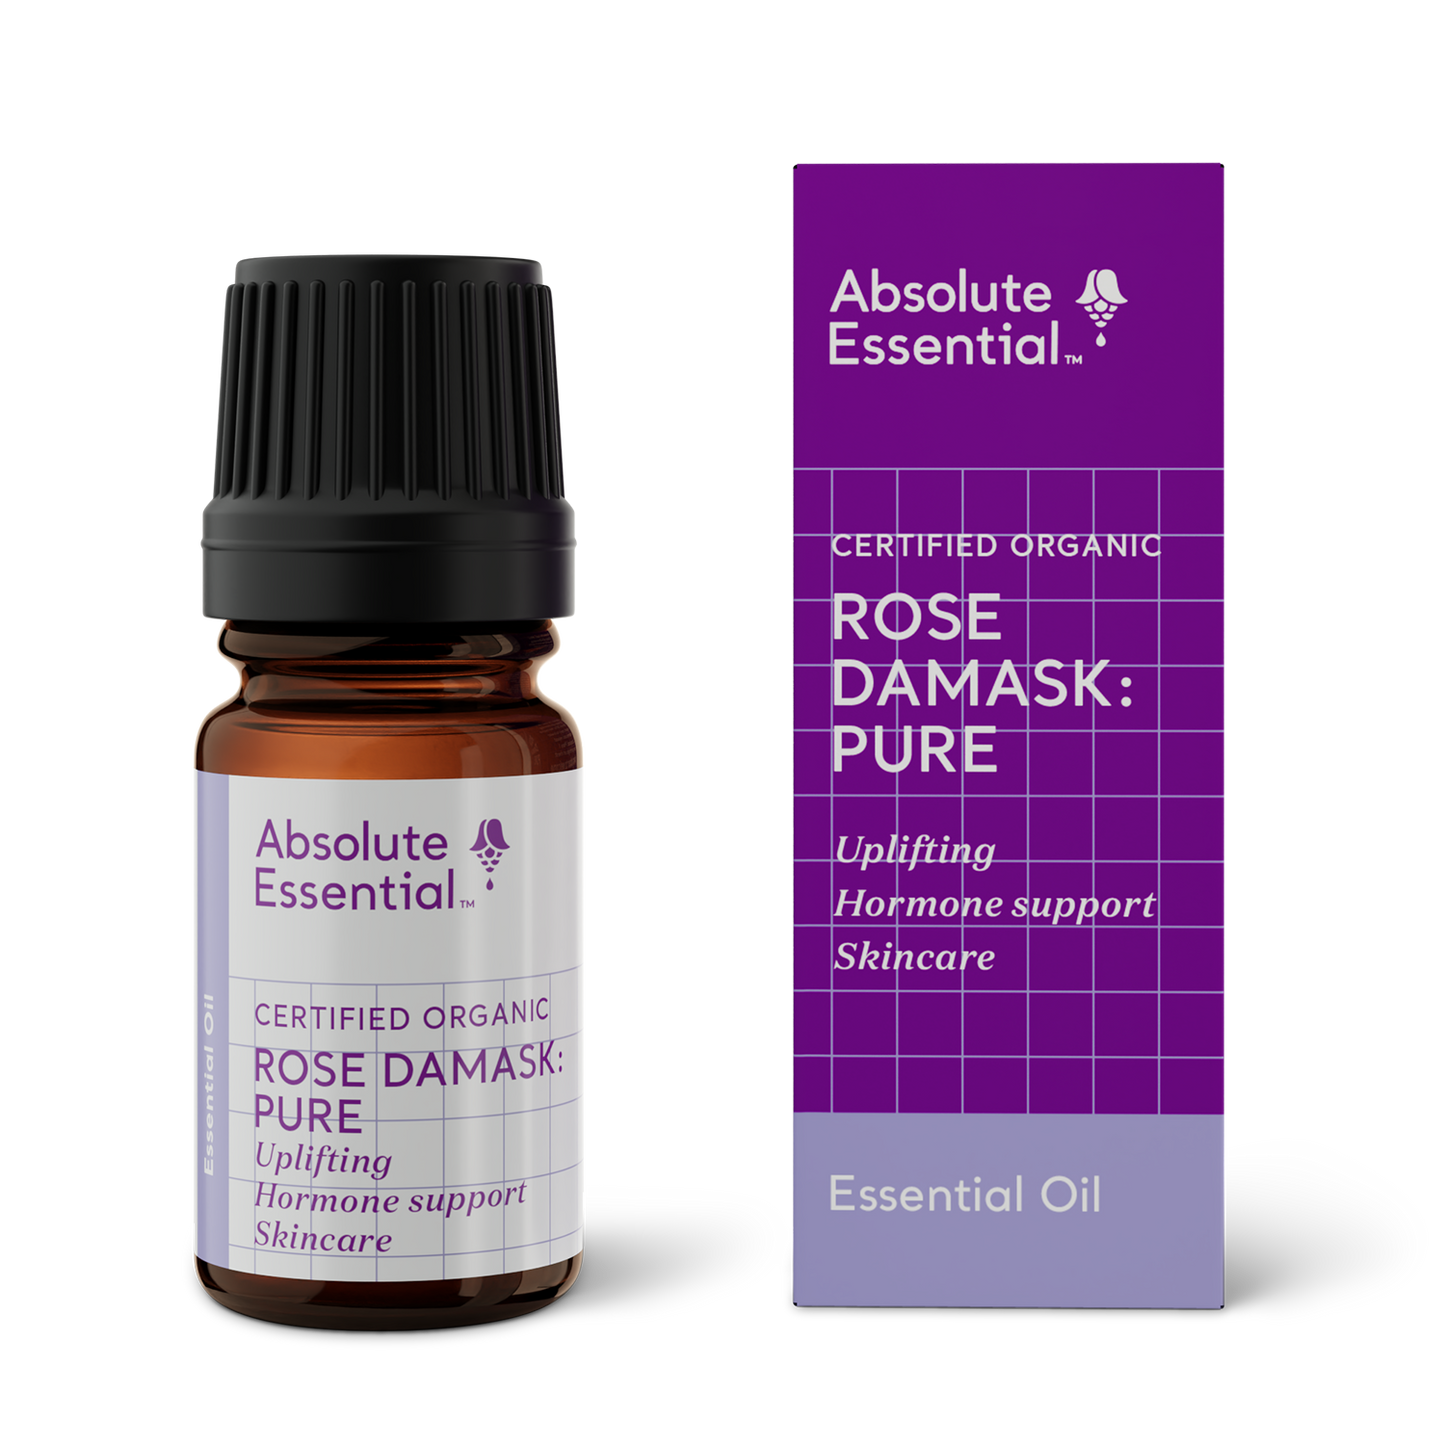 Rose Damask: Pure Essential Oil